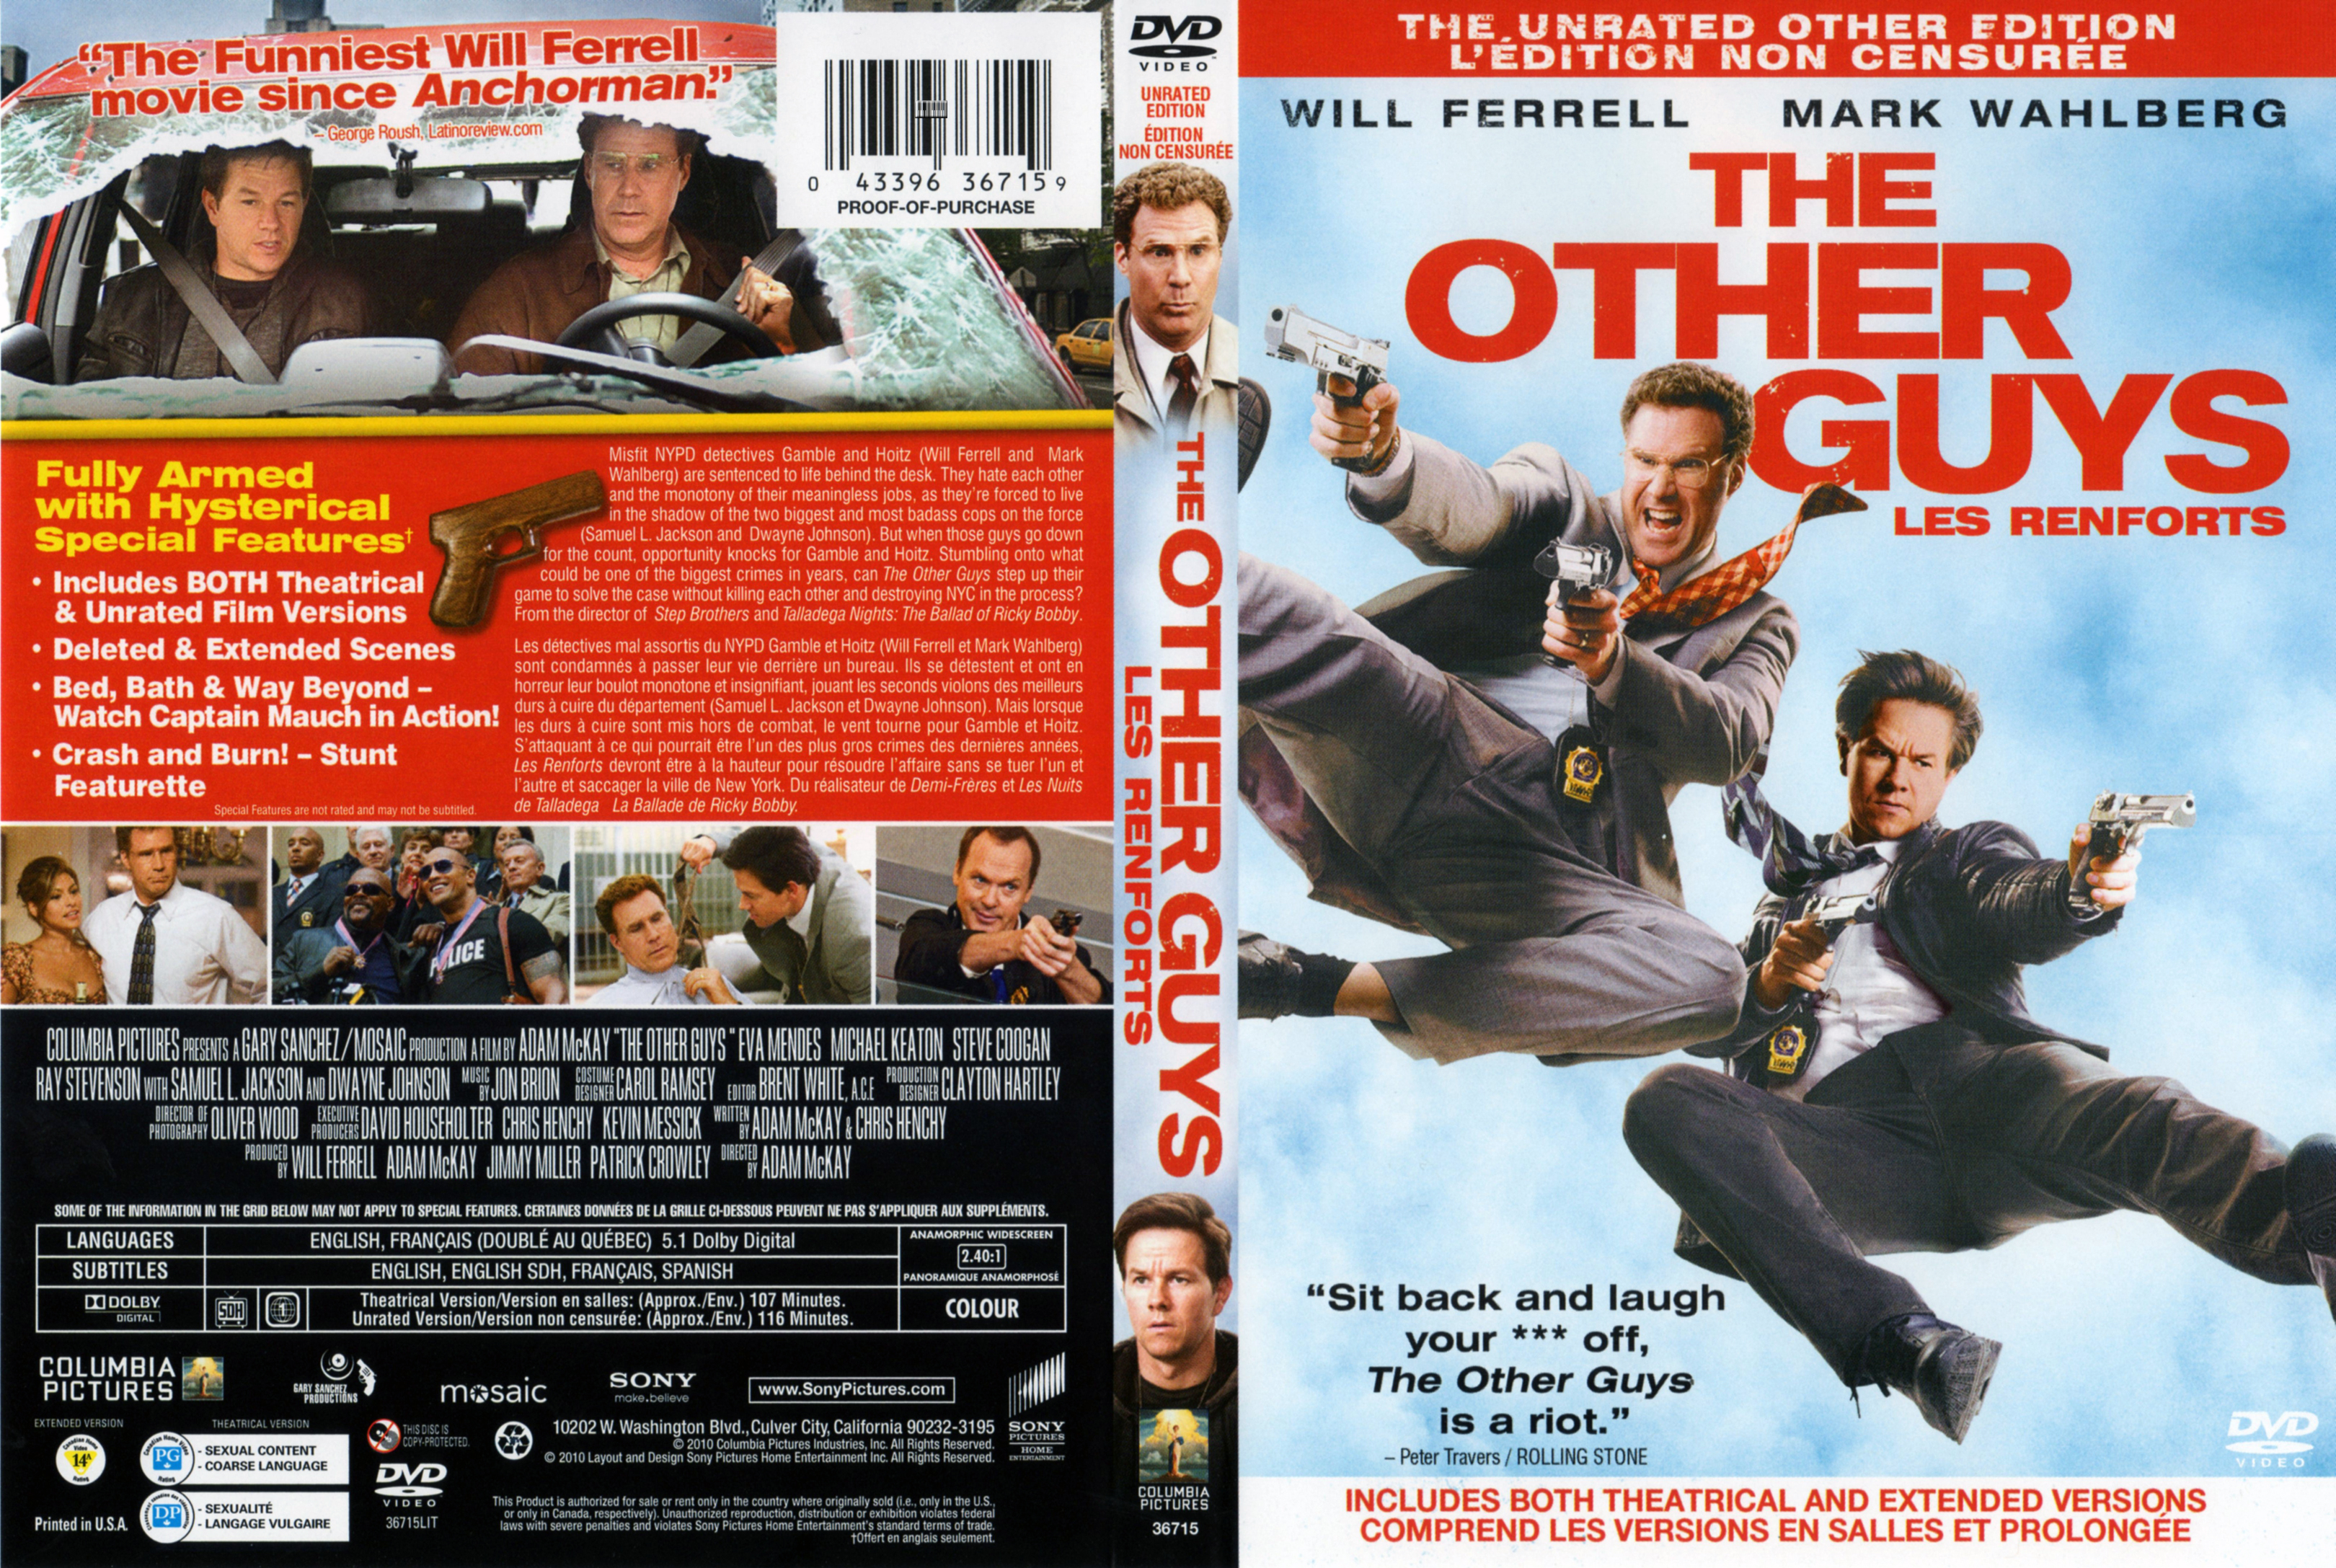 Jaquette DVD The other guys  - Les renforts (Canadienne)